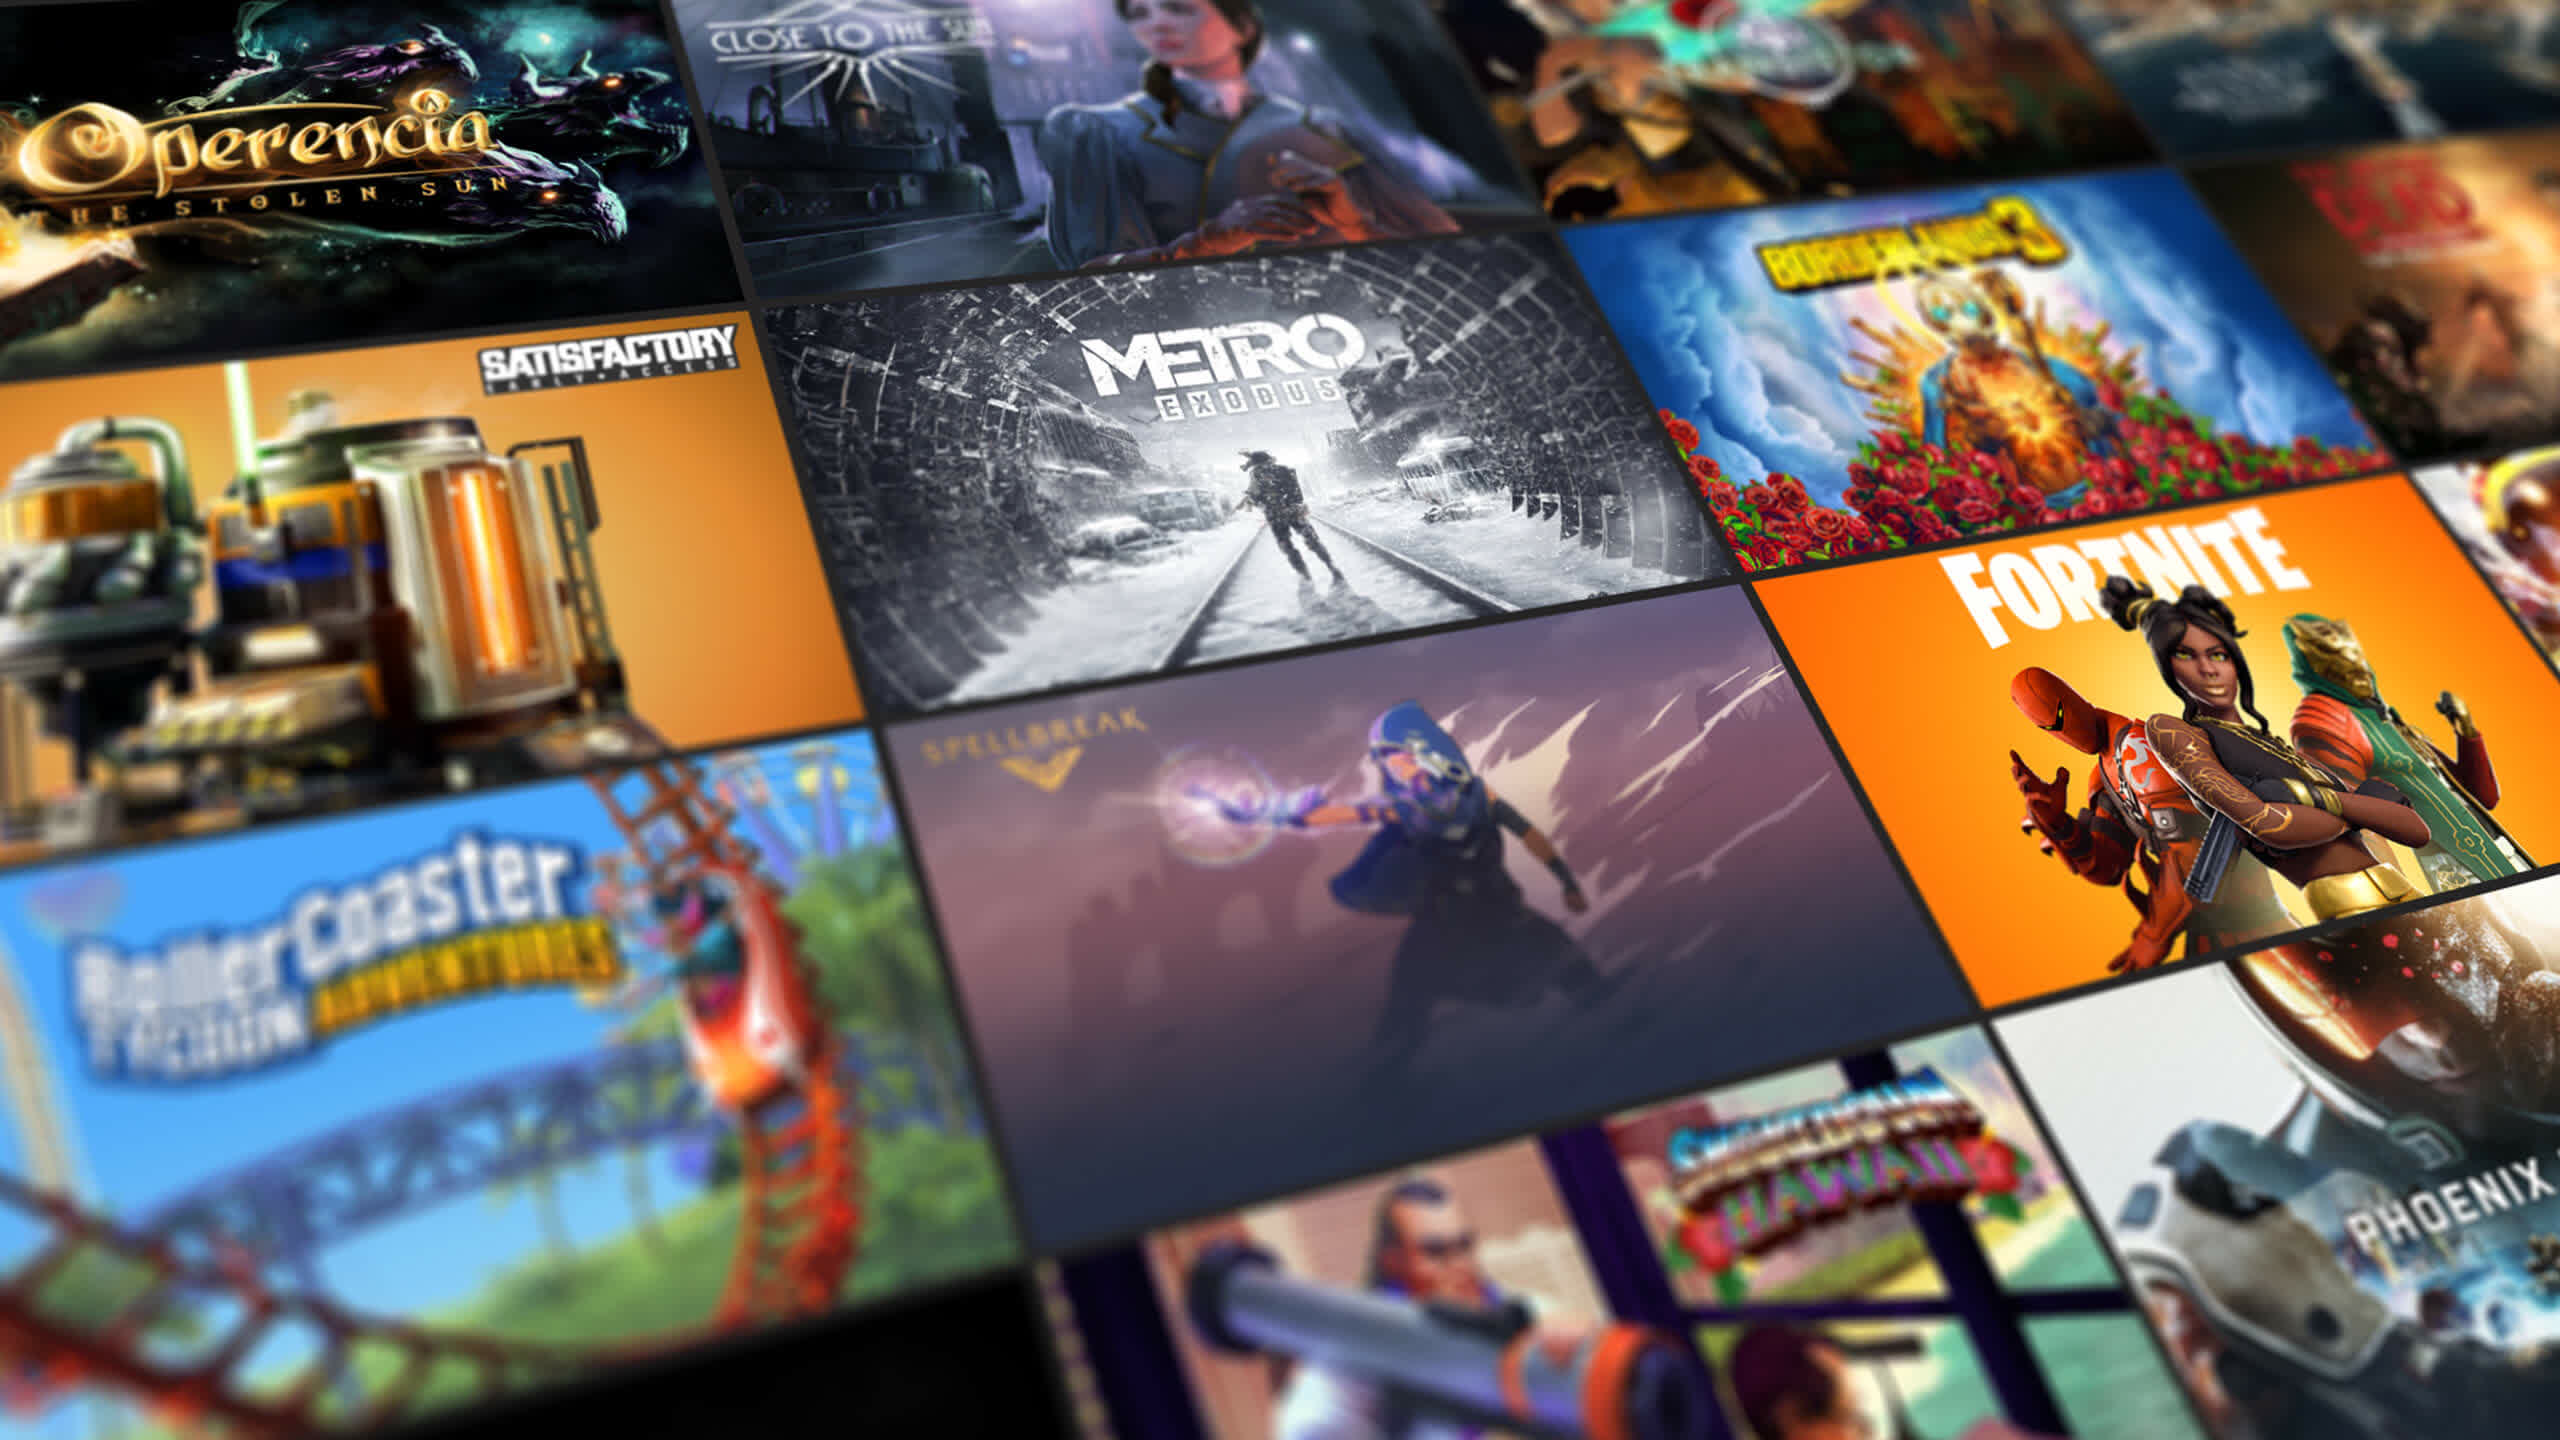 The Epic Games Store gave away nearly 750 million free games in 2020